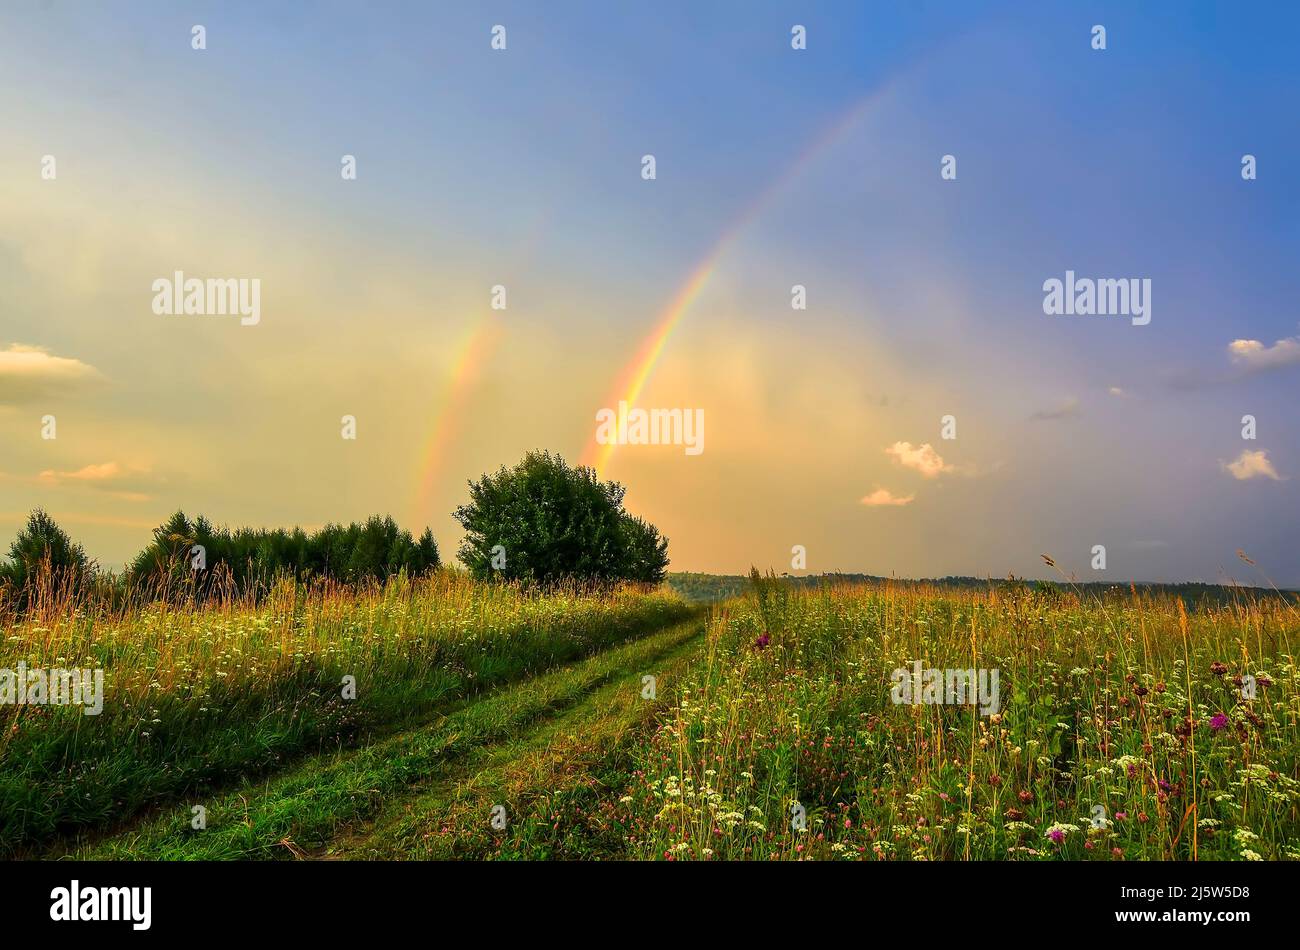 Amazing scene in summer meadow. Part arc of beautyful double rainbow over rural road and flowering meadow in fantastic evening sunlight. Landscape pho Stock Photo